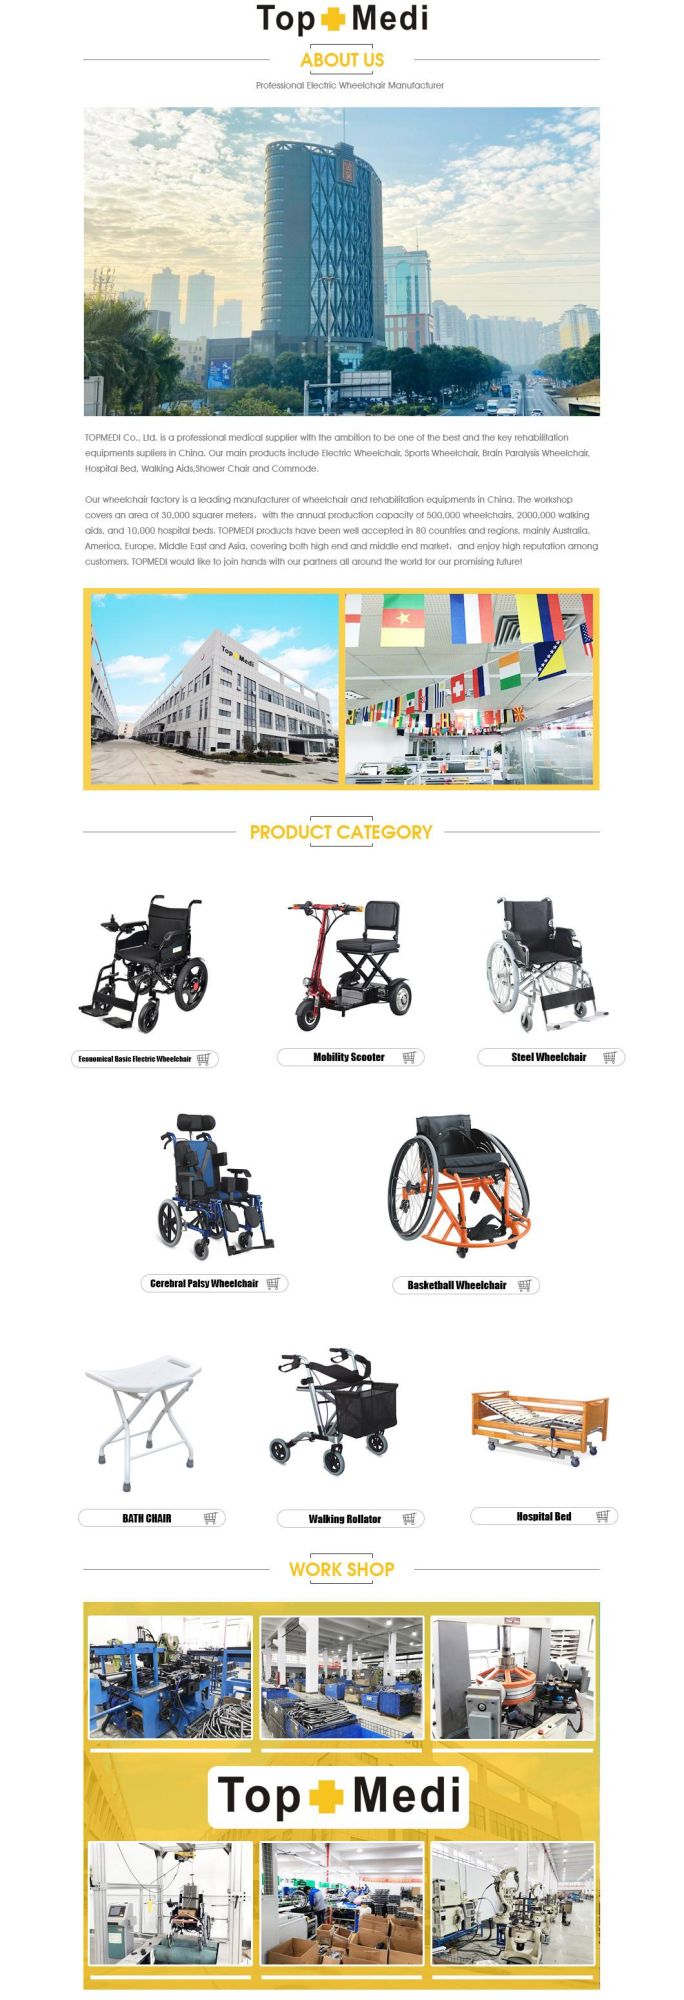 Multi-Function Electric Lift up Transfer Commode Wheelchair